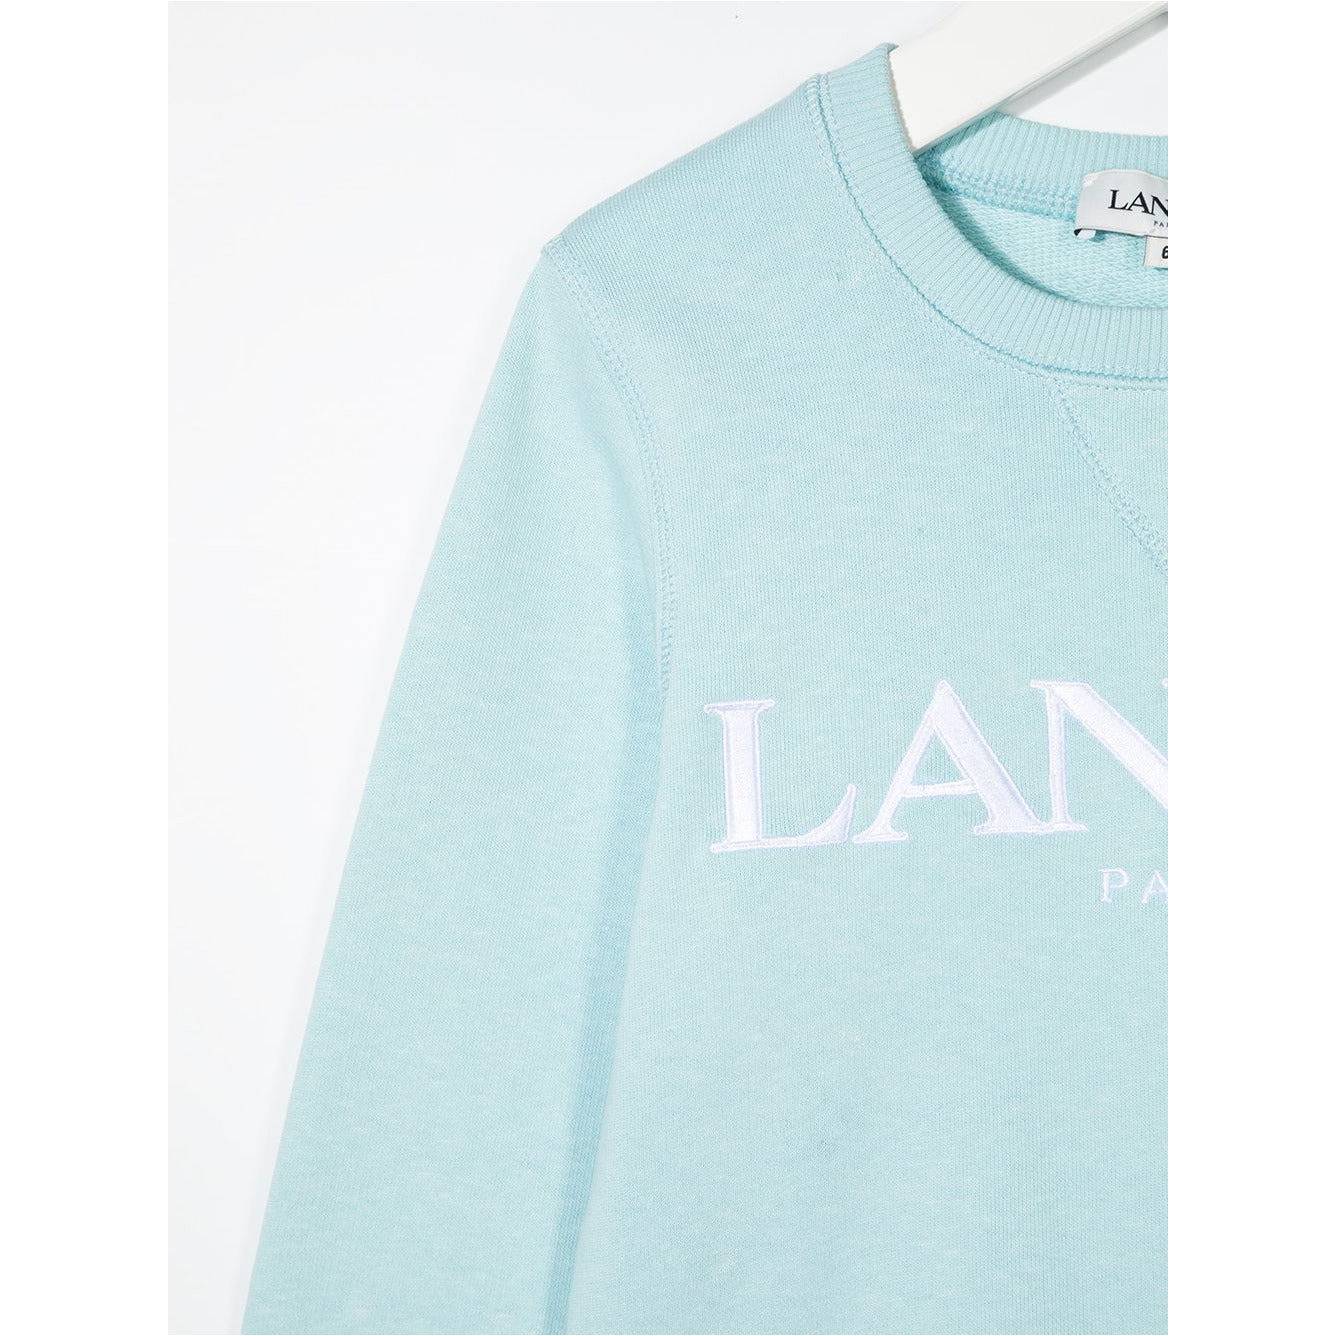 EMBROIDERED LOGO SWEATER